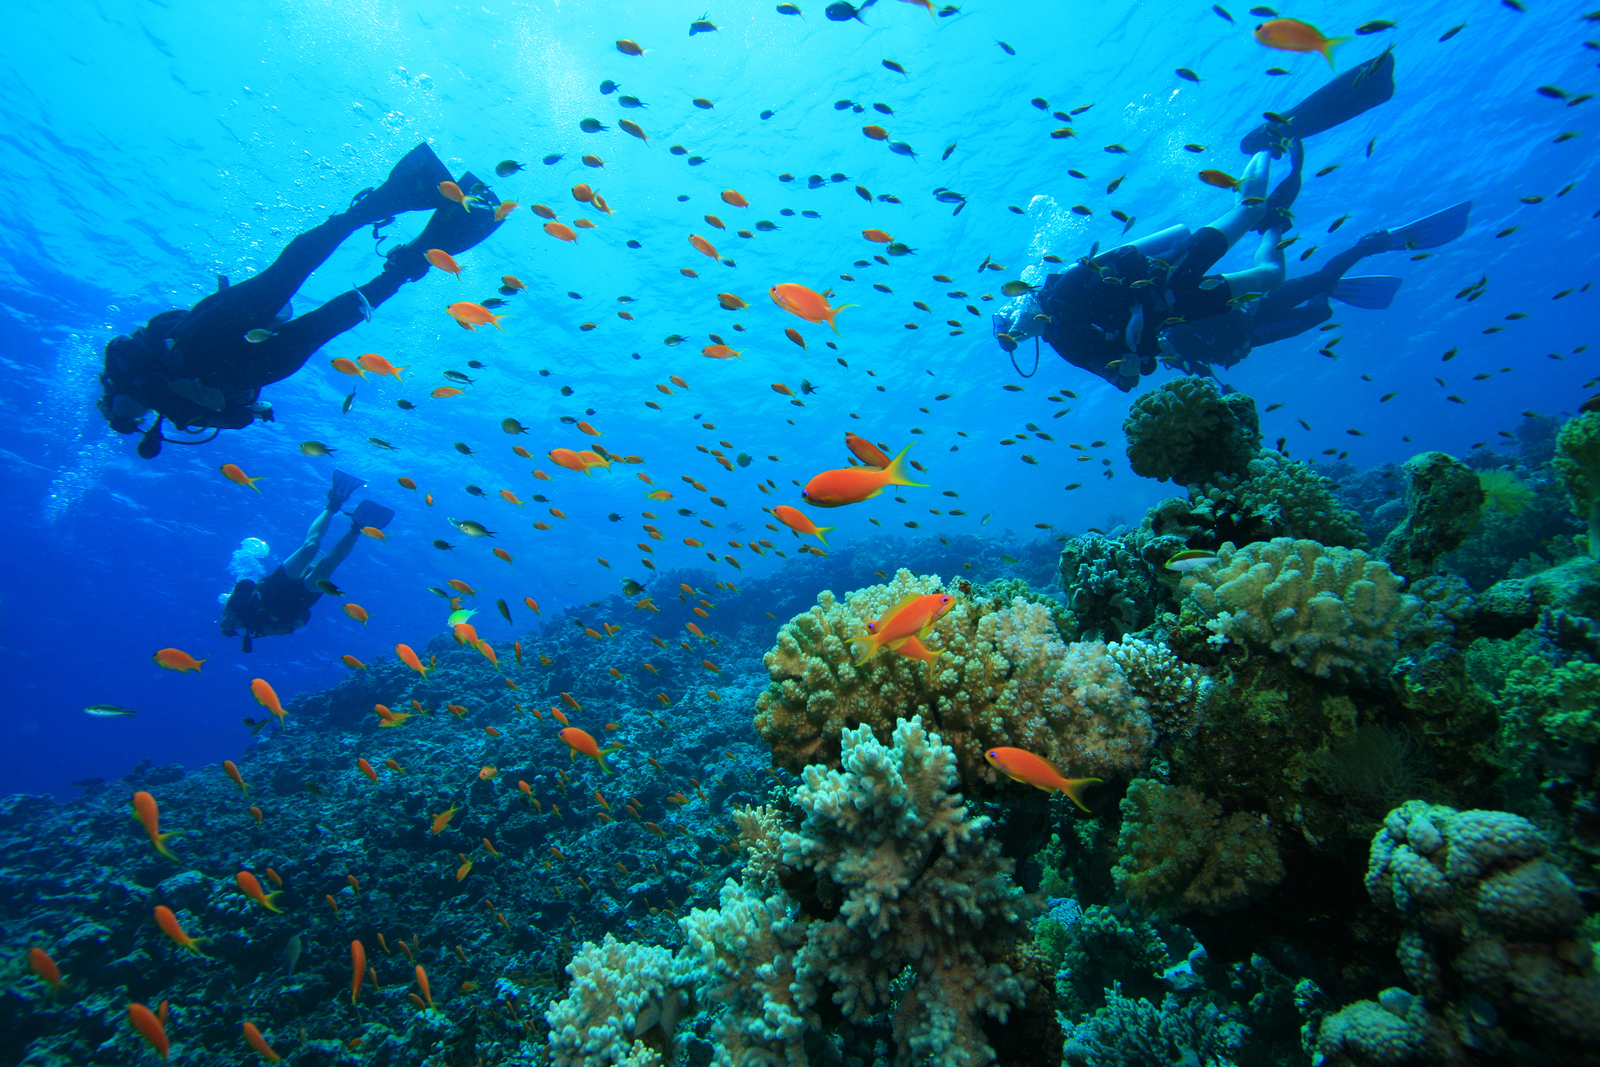 https://www.booksandtravel.page/wp-content/uploads/2019/05/bigstock-Scuba-Diving-on-a-Coral-Reef-w-26725130.jpg